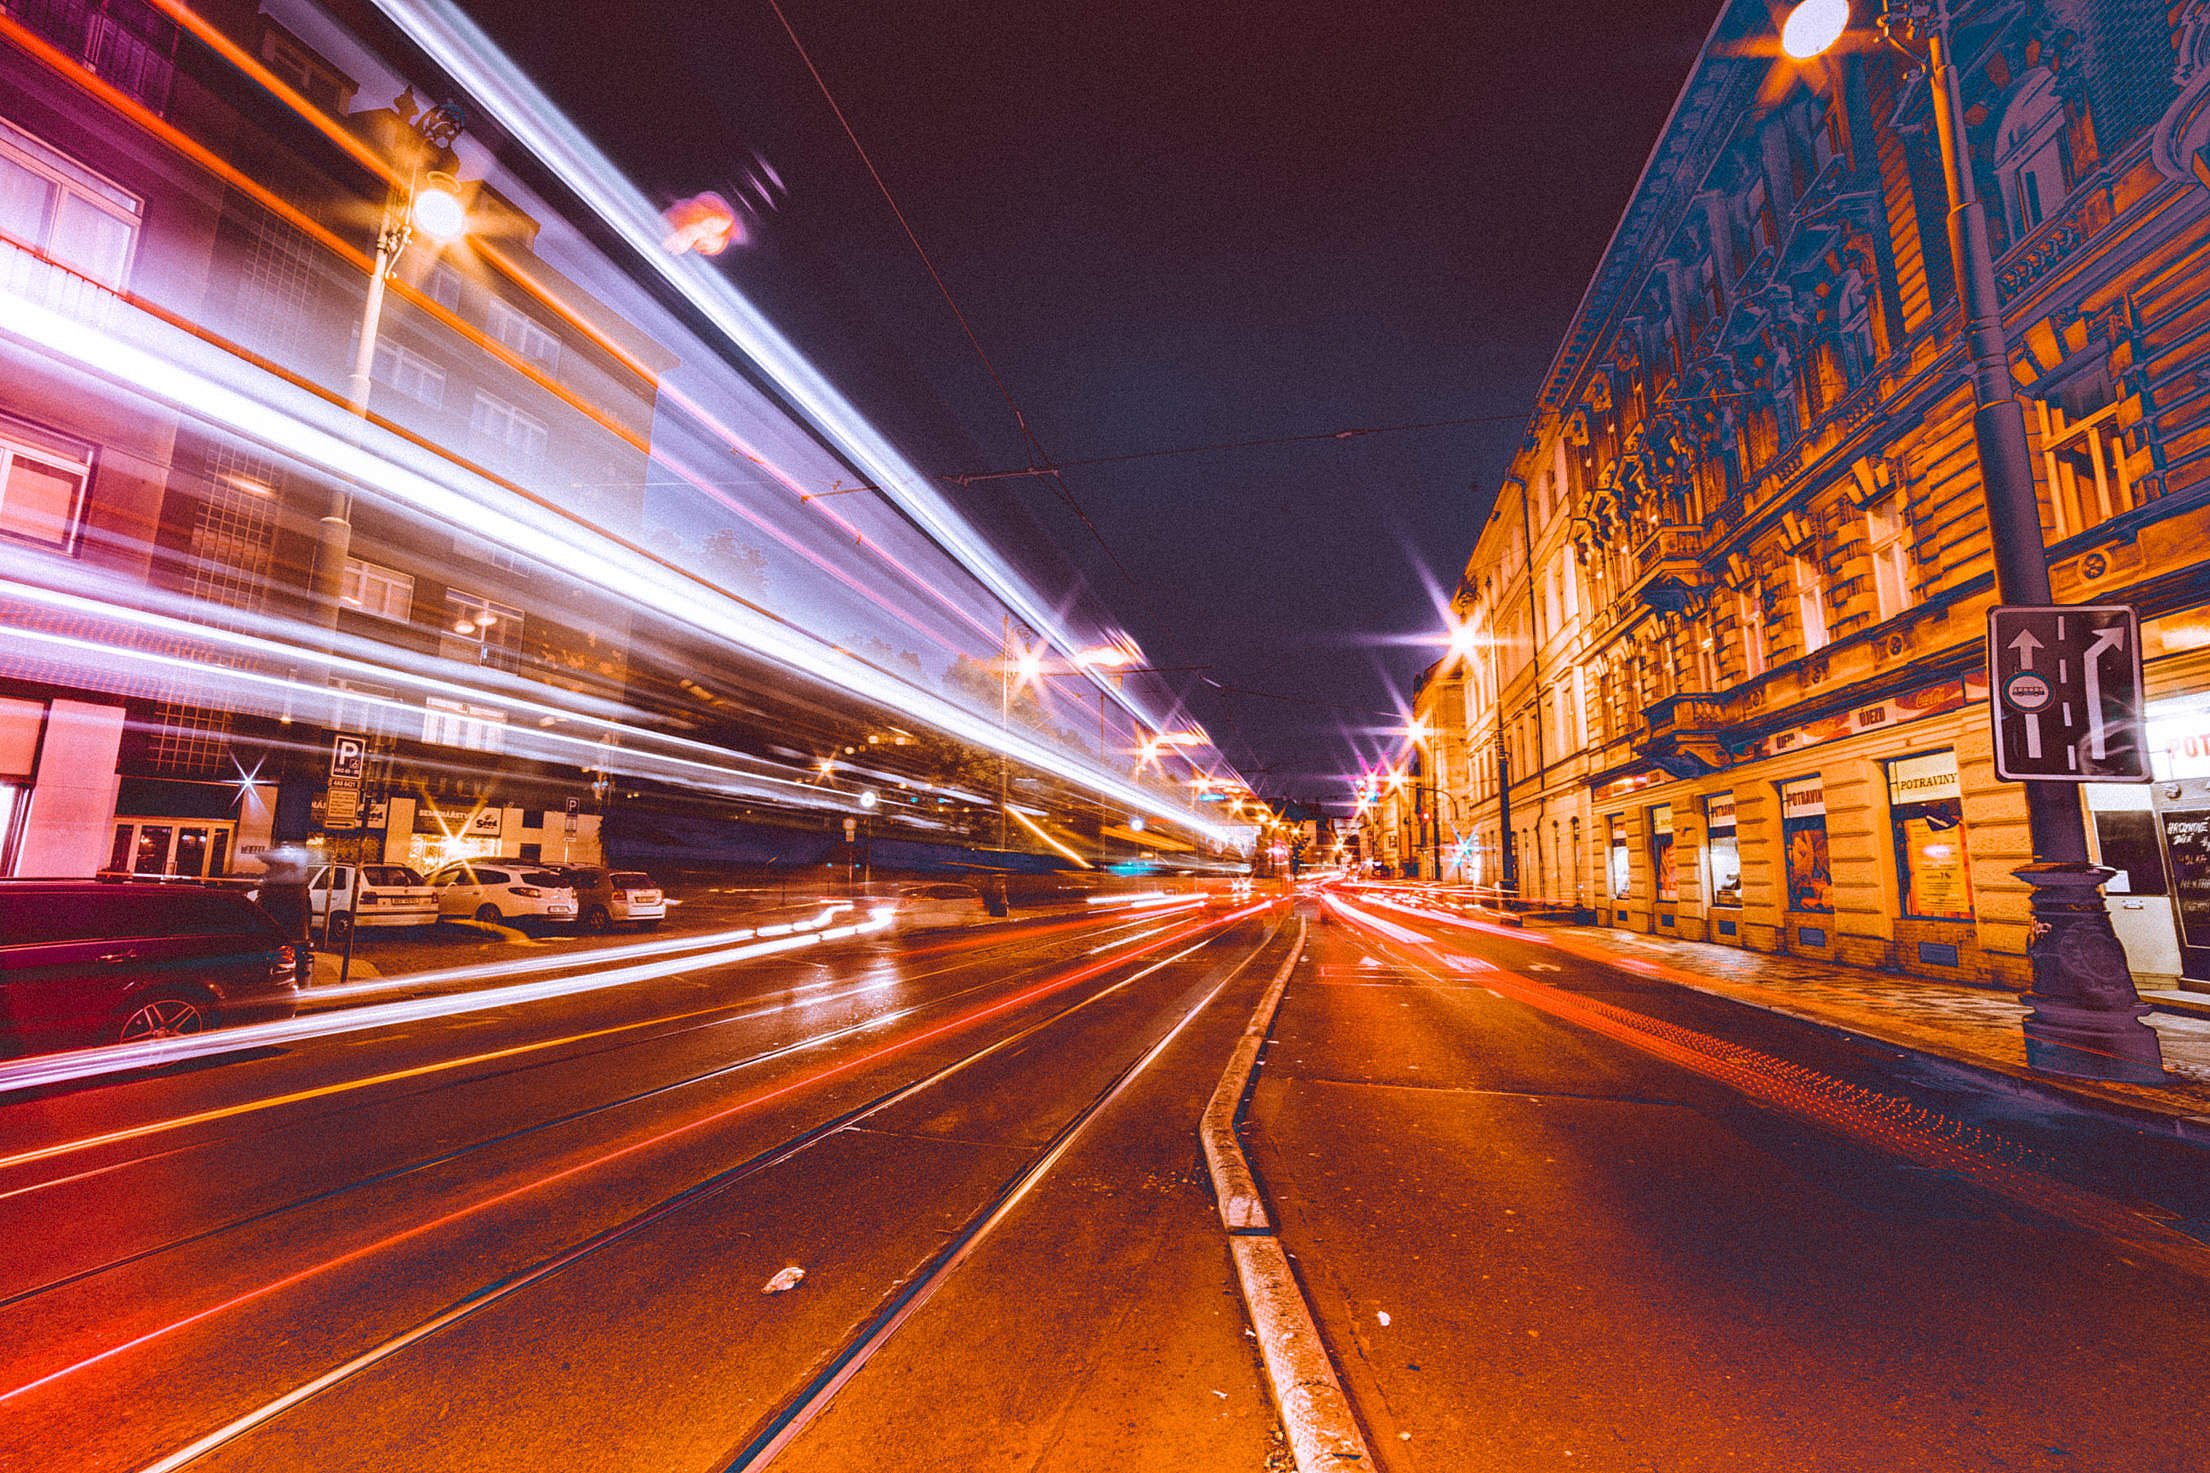 Busy City Streets at Night Free Stock Photo Download | picjumbo